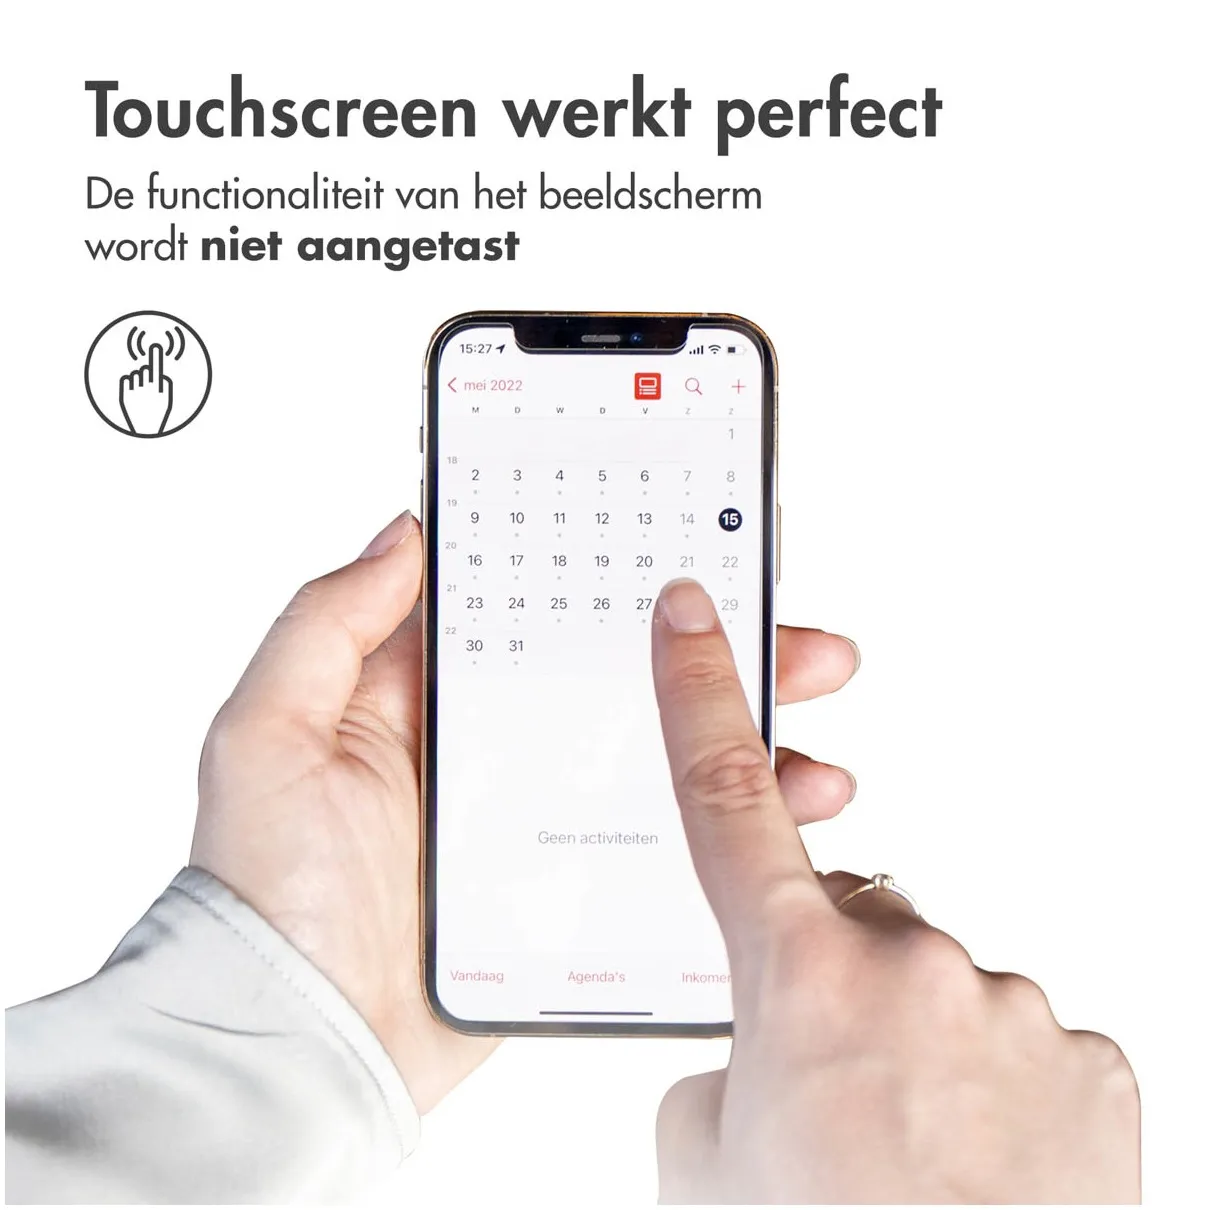 Accezz Gehard Glas Screenprotector OnePlus Nord 3 Transparant